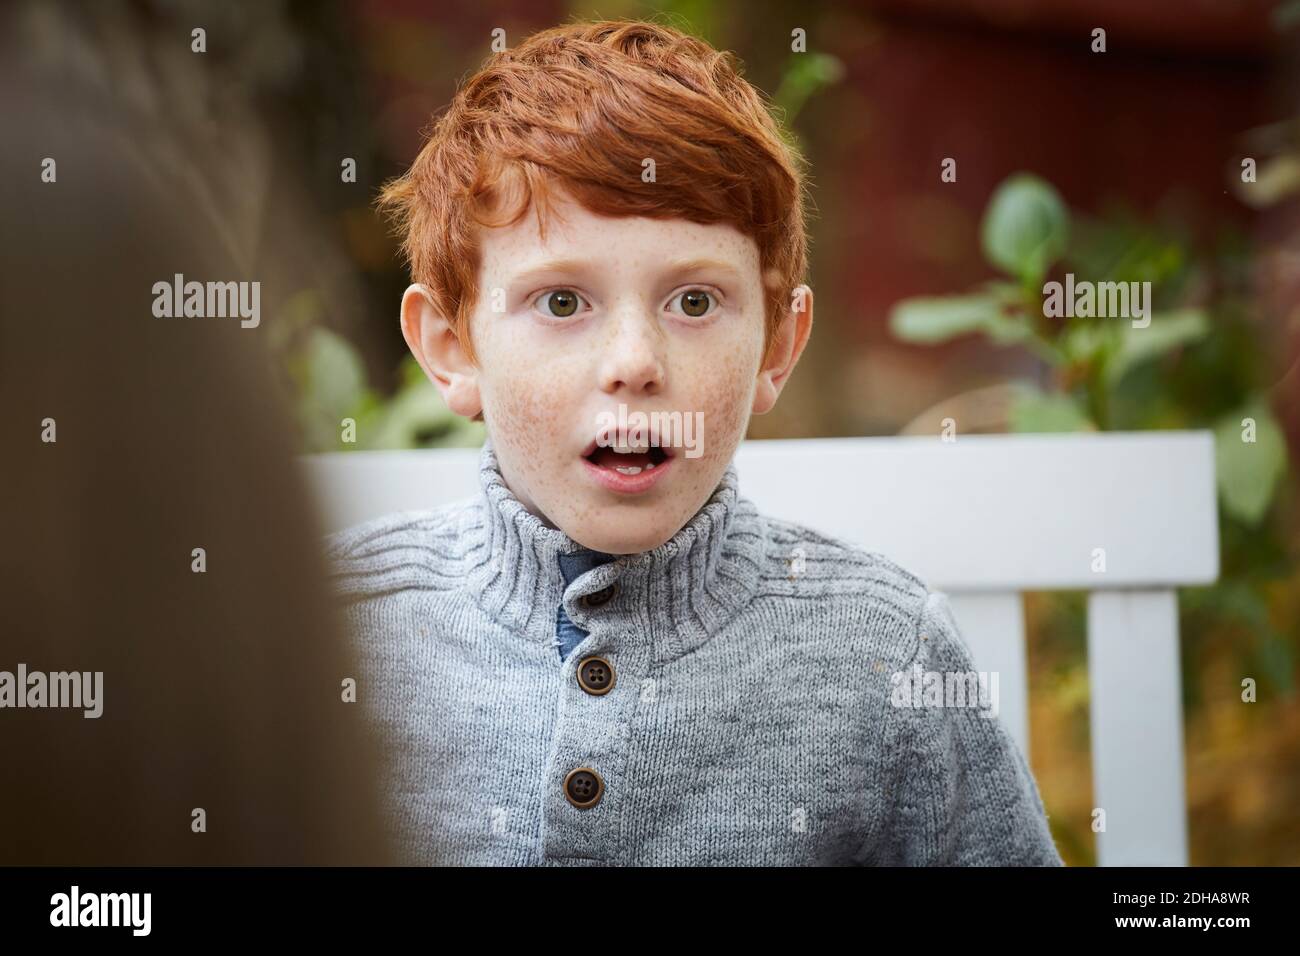 Surprised boy looking away while sitting in yard Stock Photo